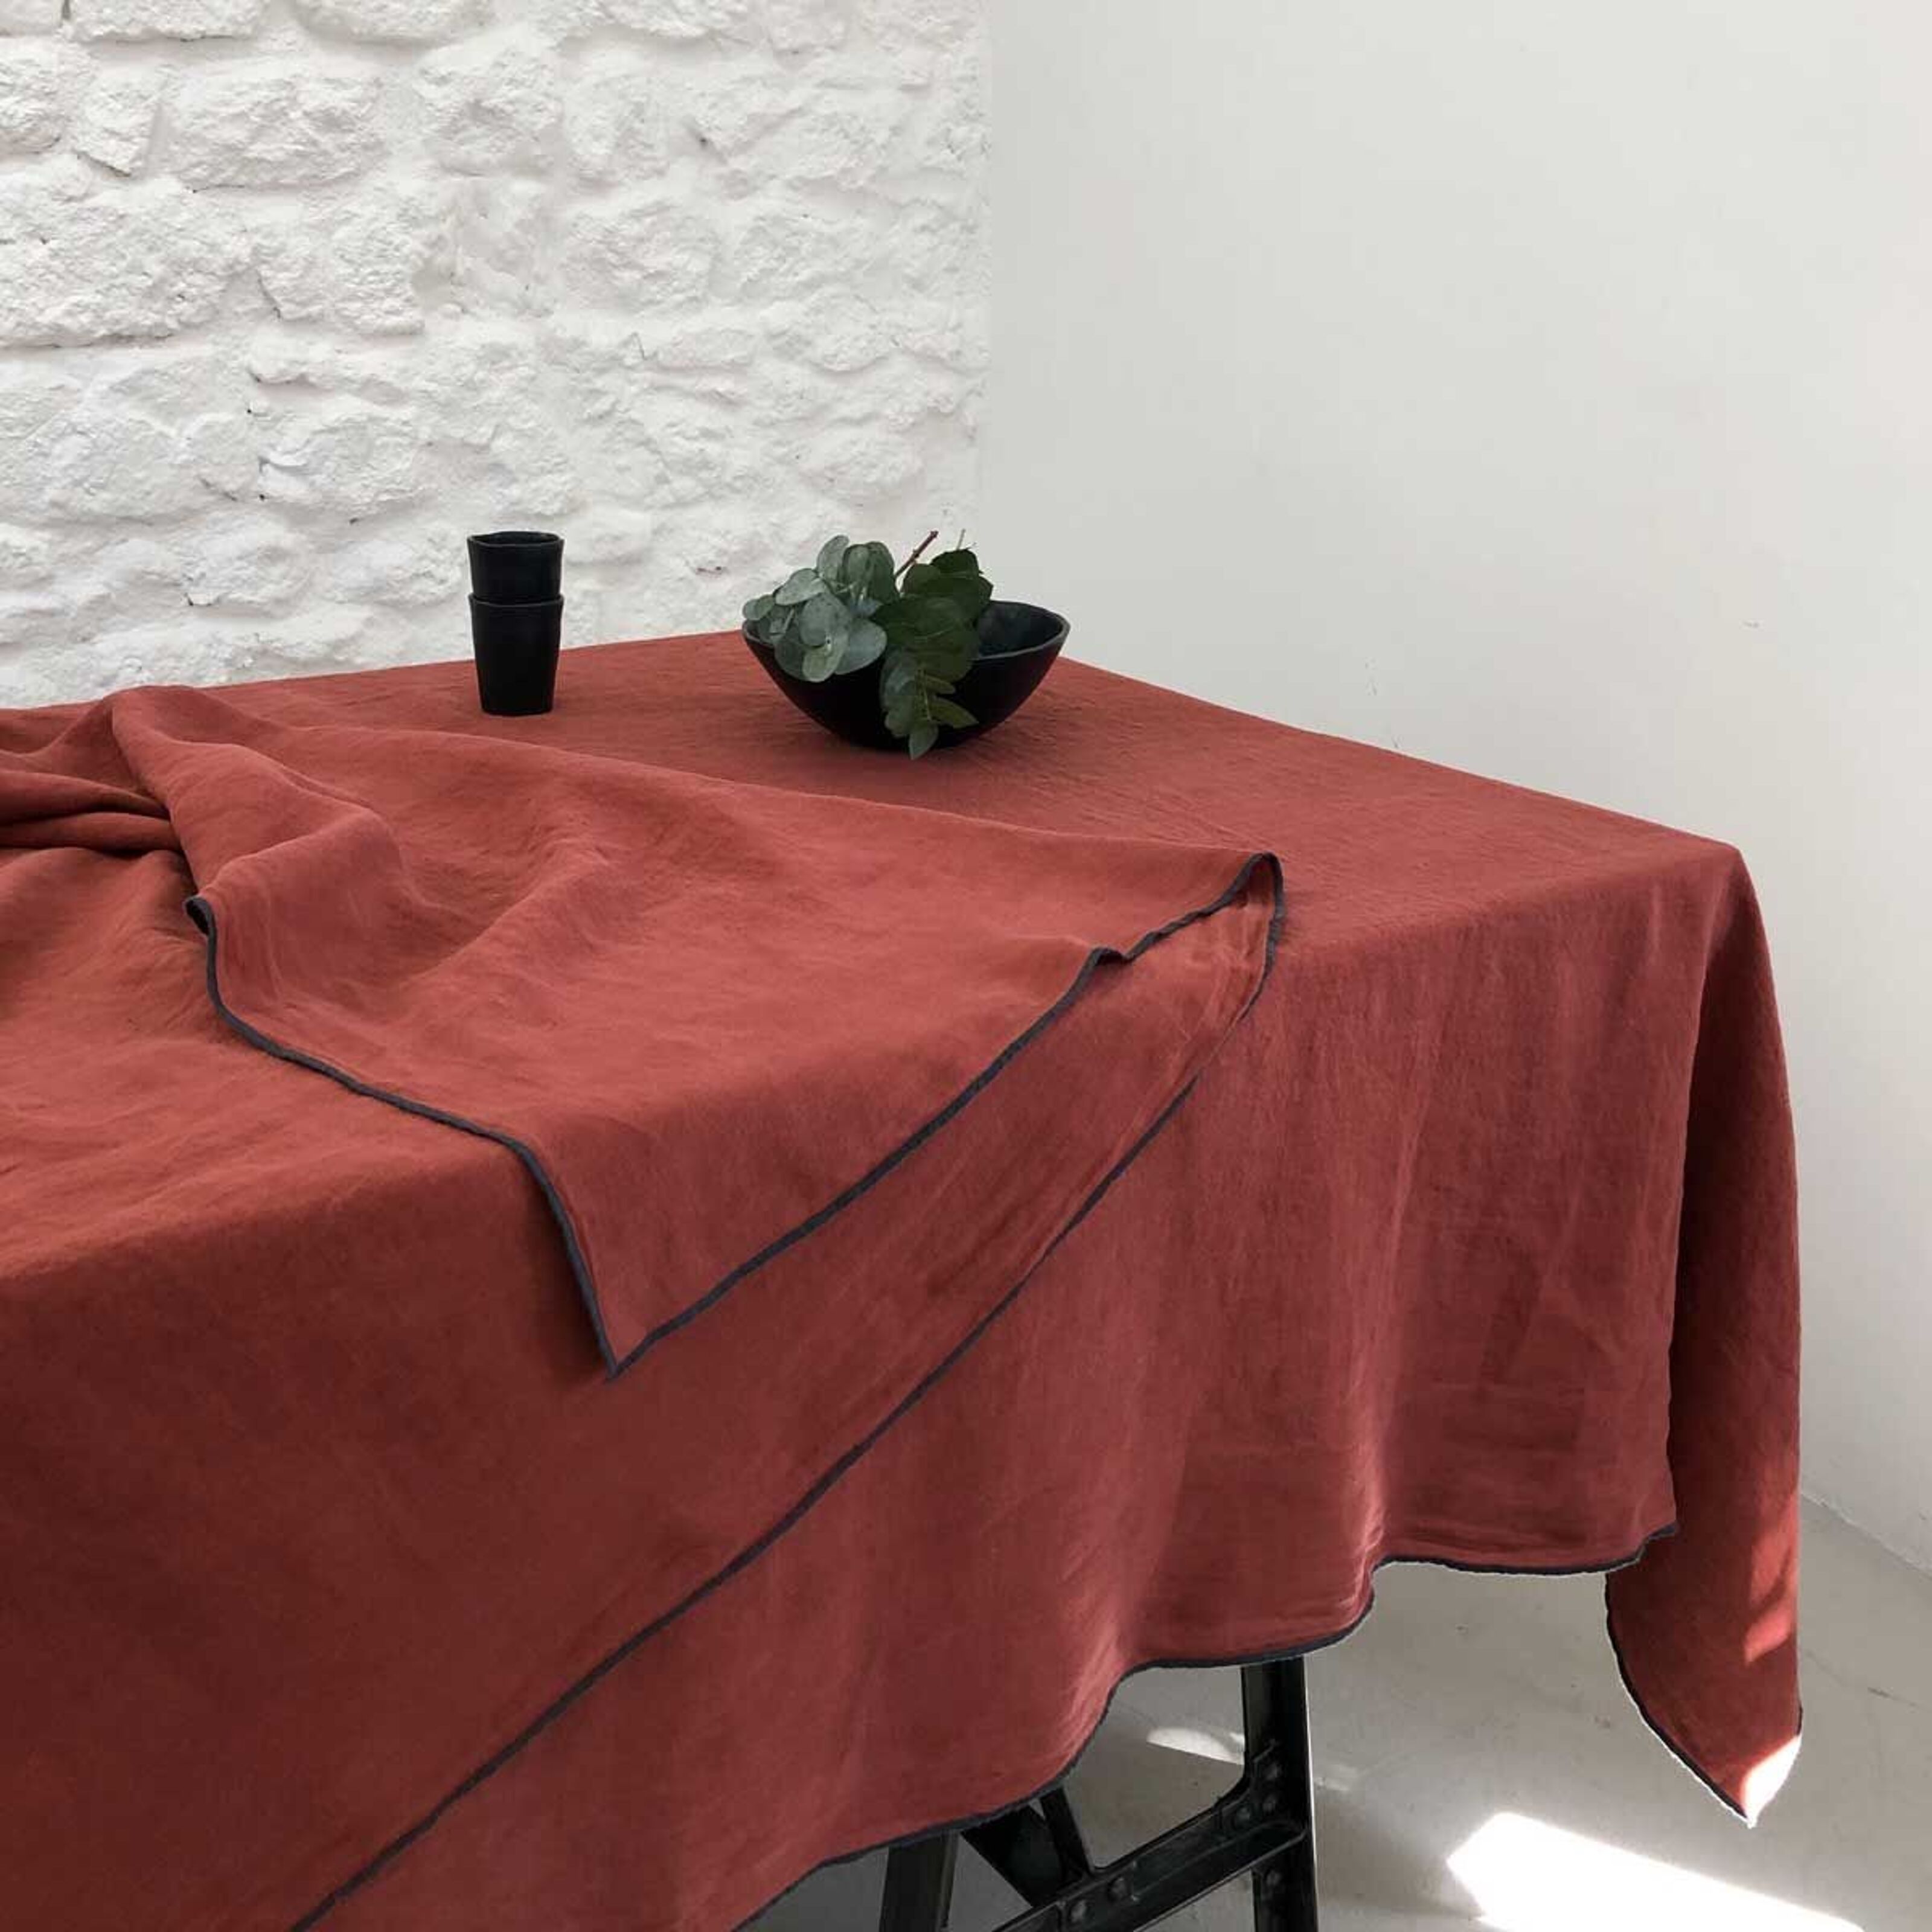 Buy curtain Vernet - or tablecloth Oslo linen washed wholesale 170x300cm overlock terracotta Passage